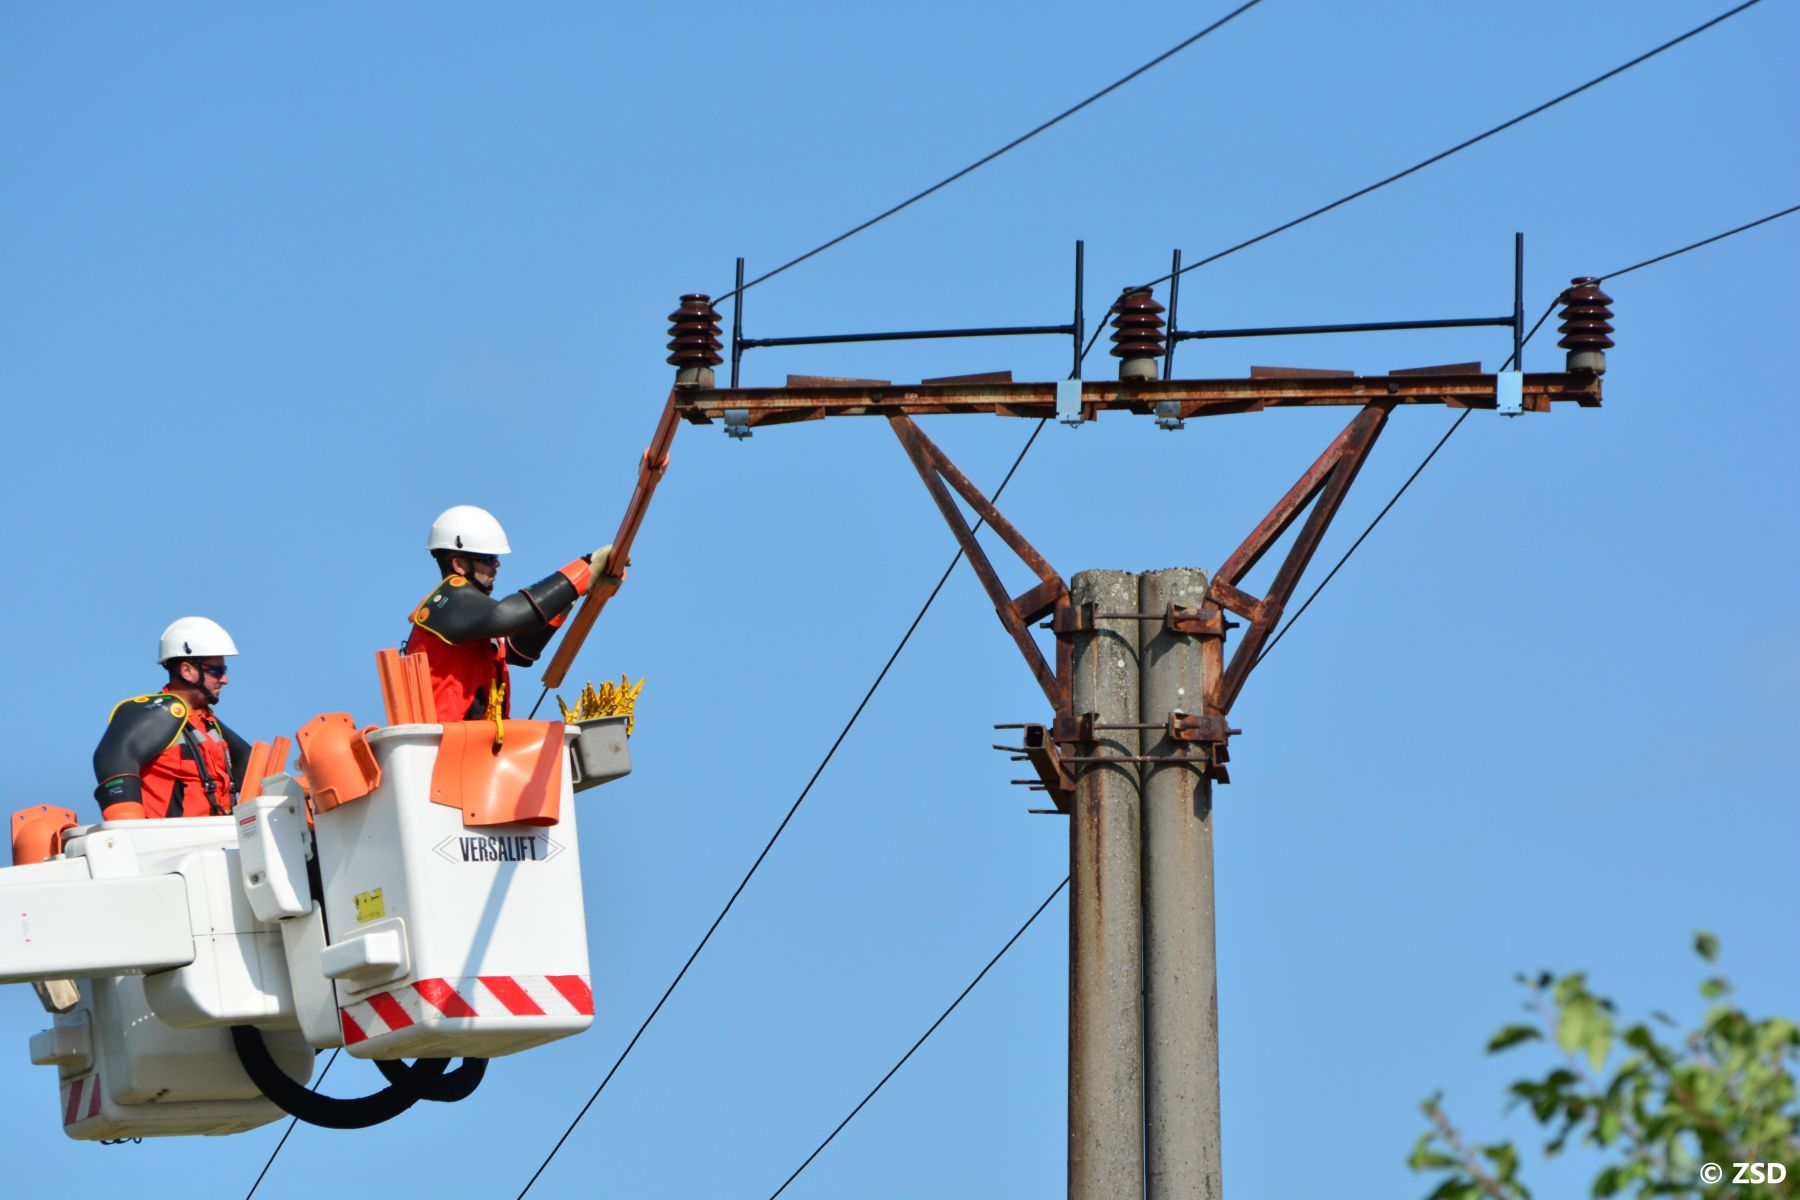 Installation of the equipment for the safe bird perching on the utility pole